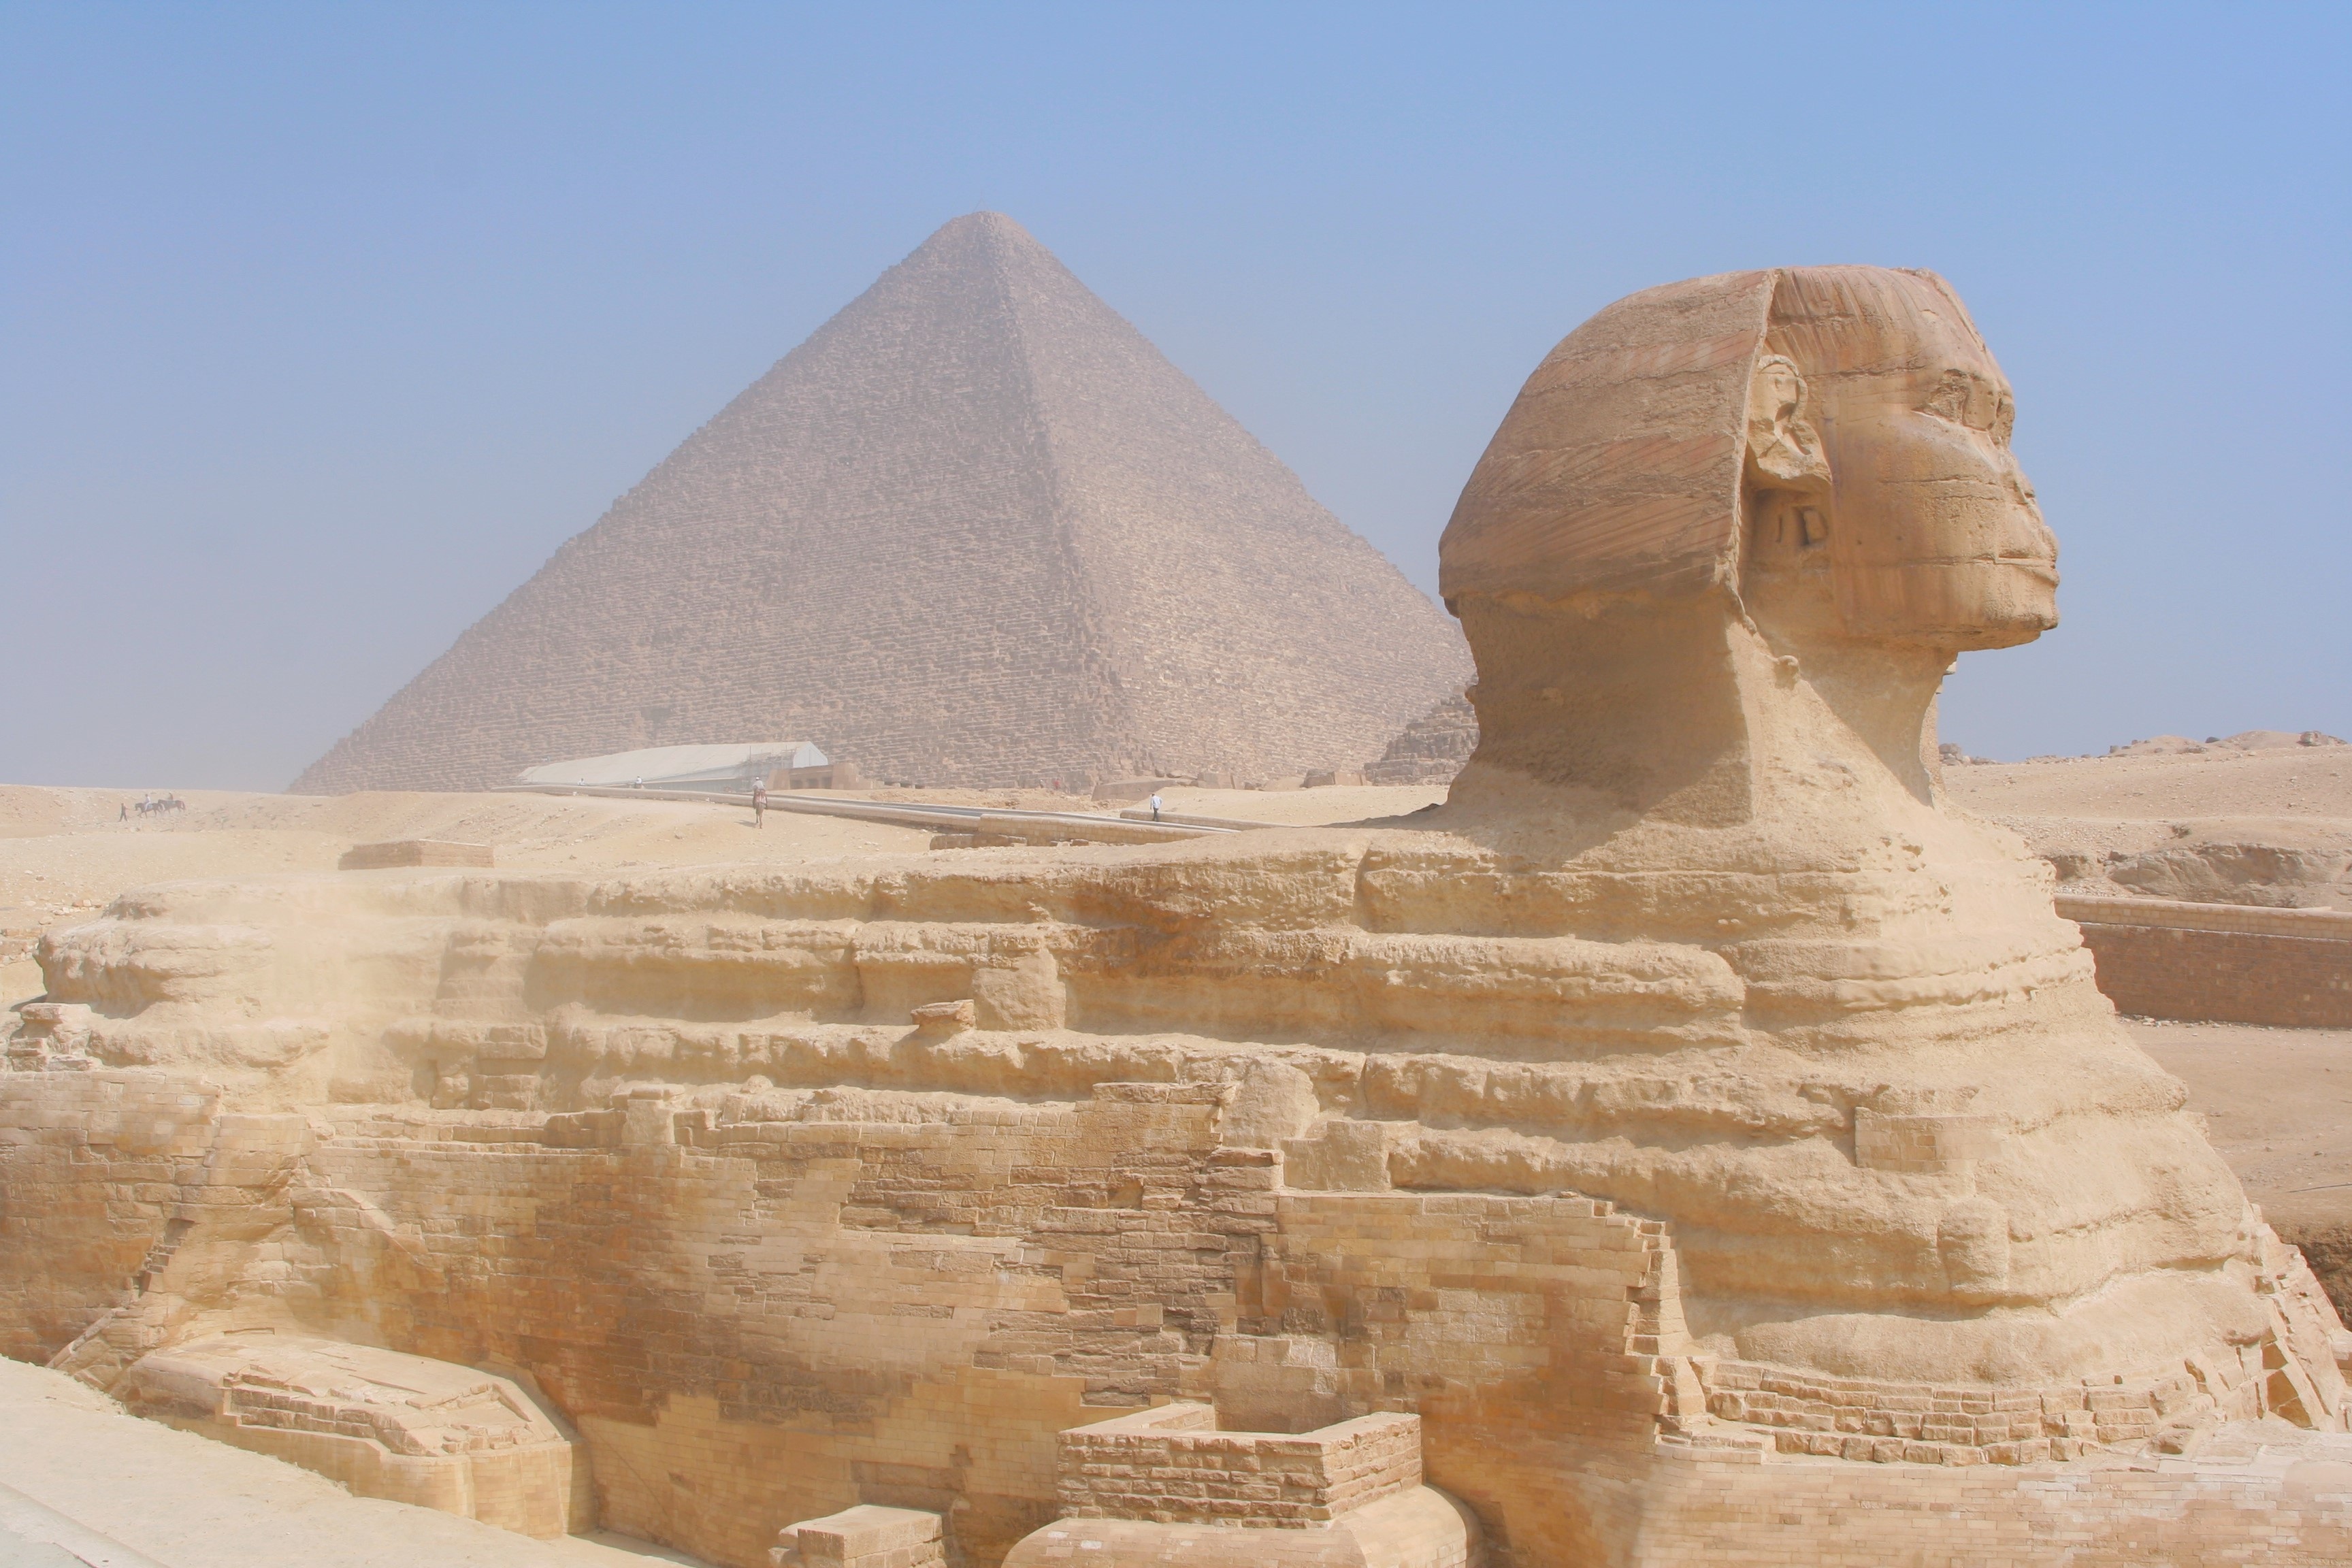 The Great Sphinx of Egypt, giza, pyramid, sandstorm, haze, world heritage site